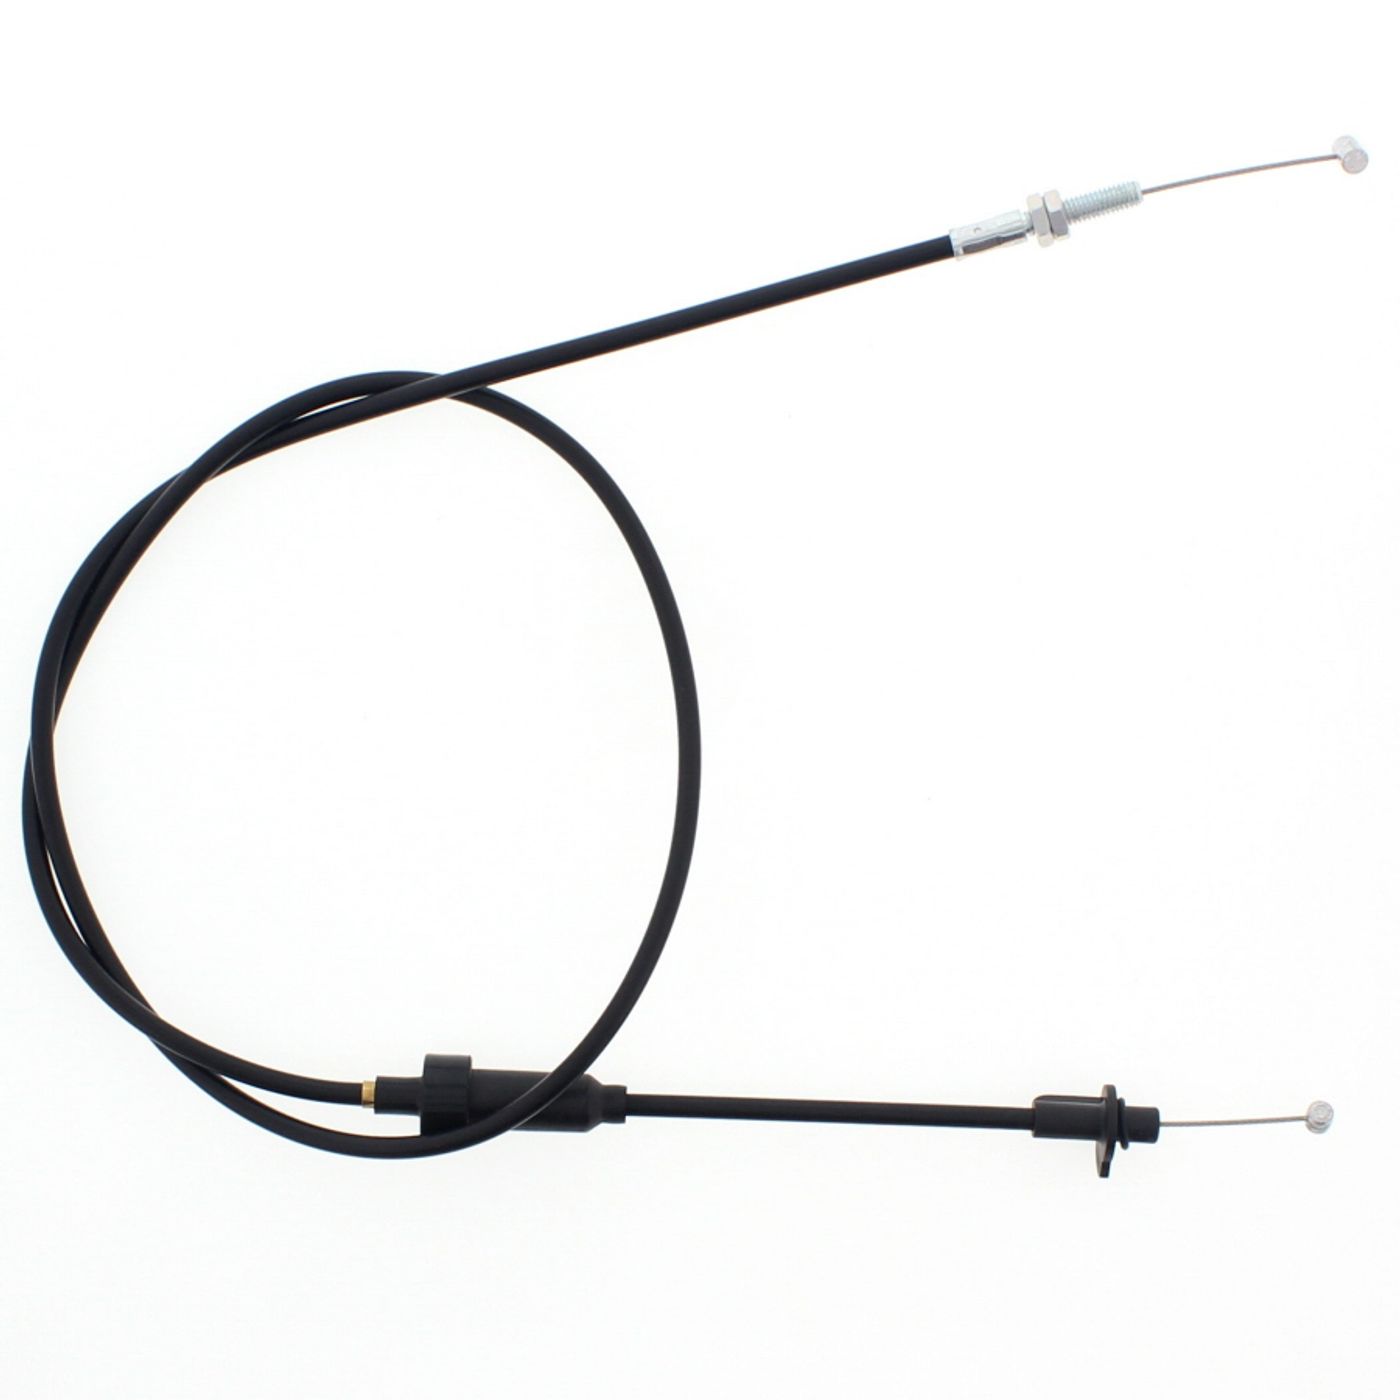 Wrp Throttle Cables - WRP451155 image